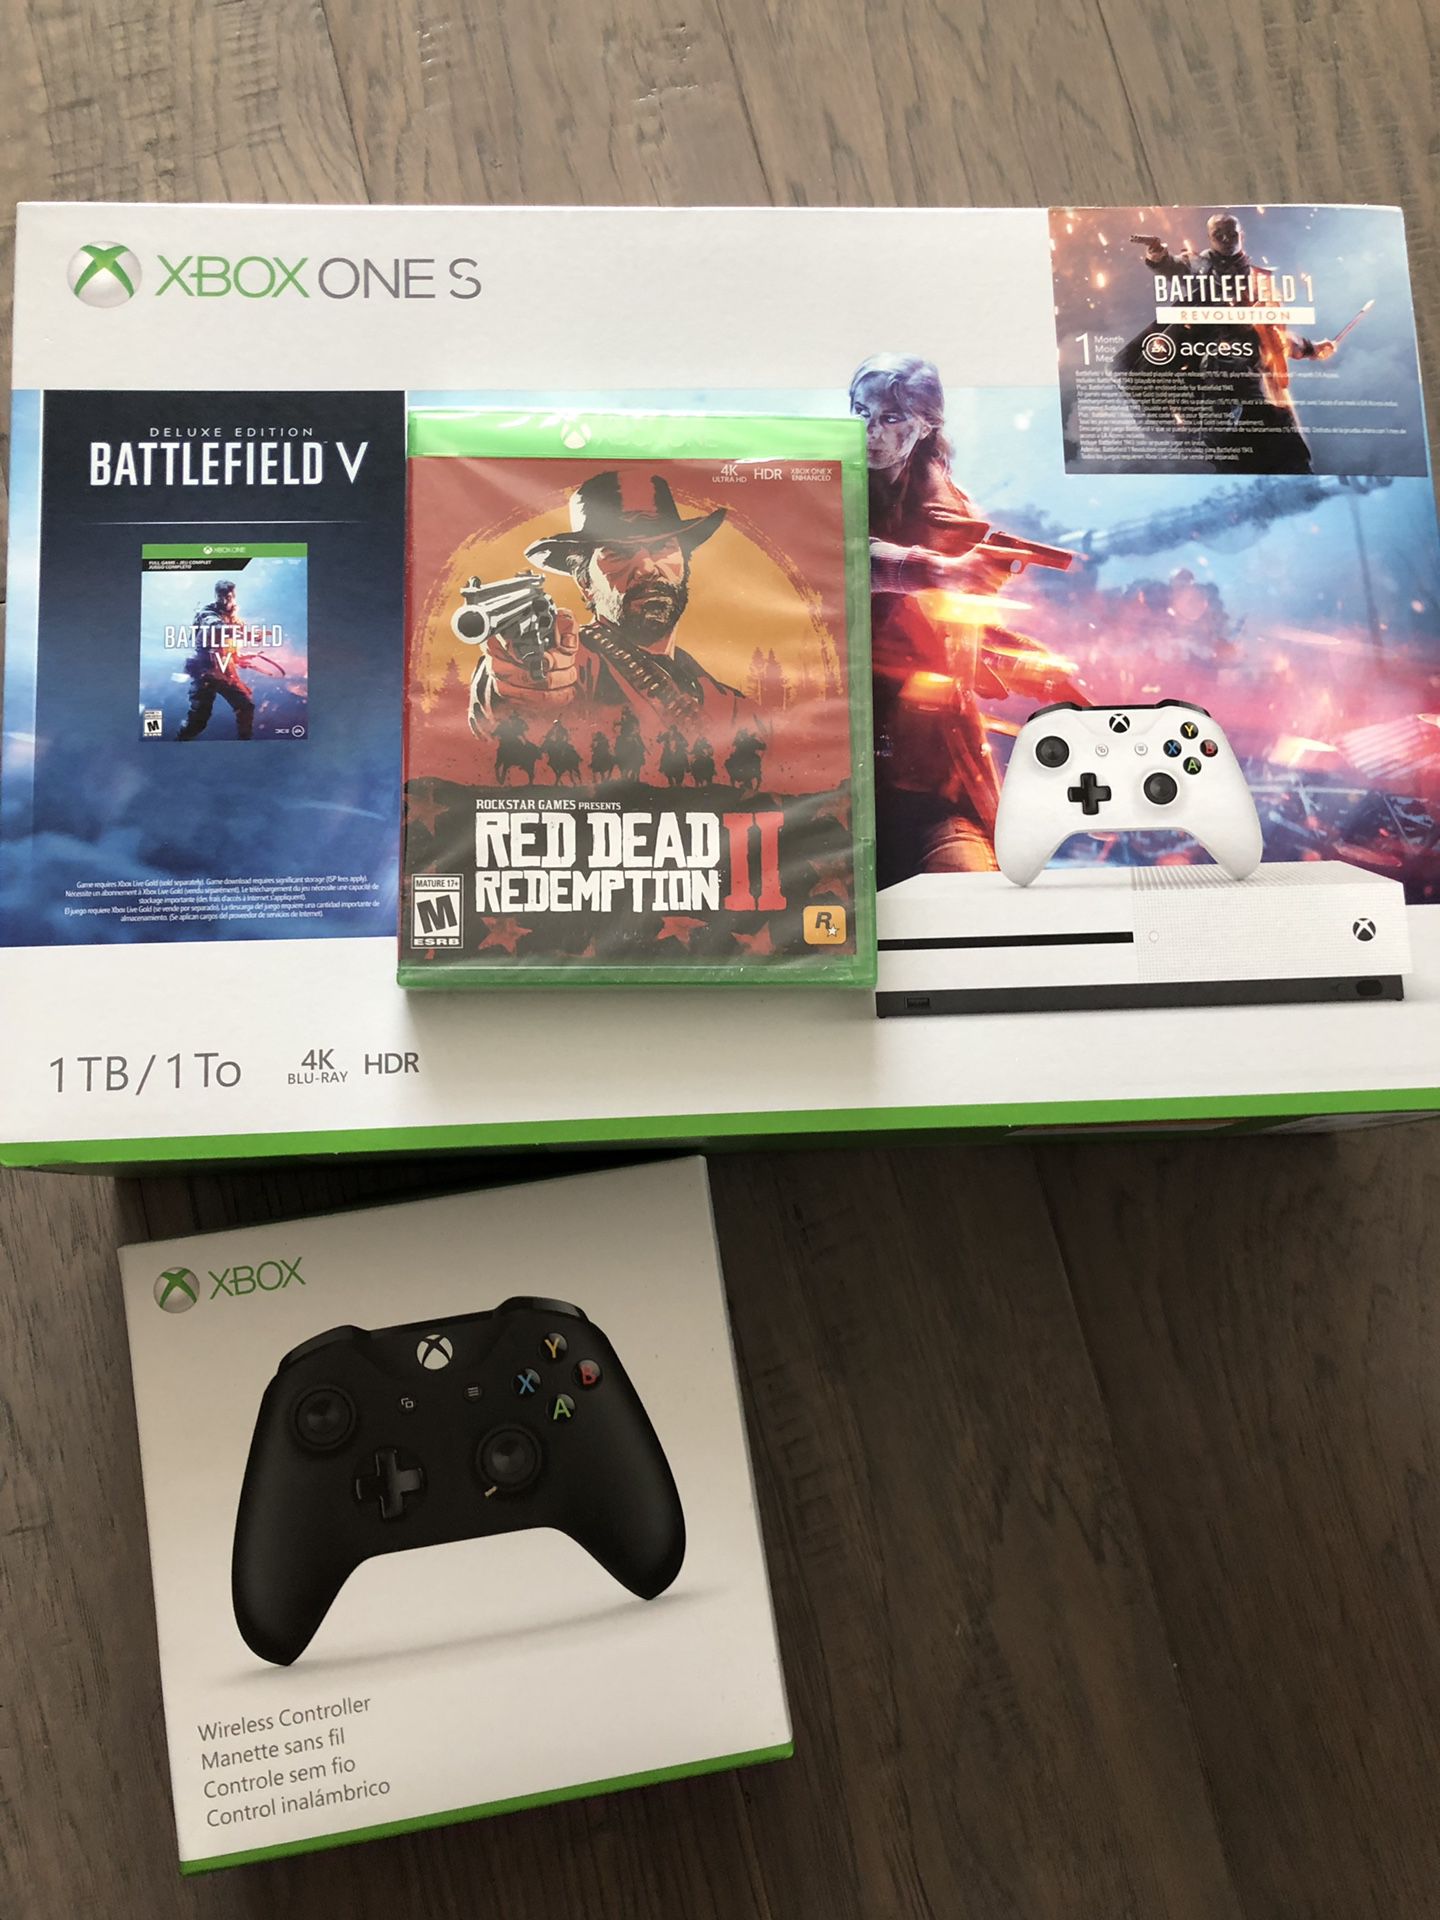 Xbox One S + Battlefield V + red dead redemption + extra controller BRAND NEW